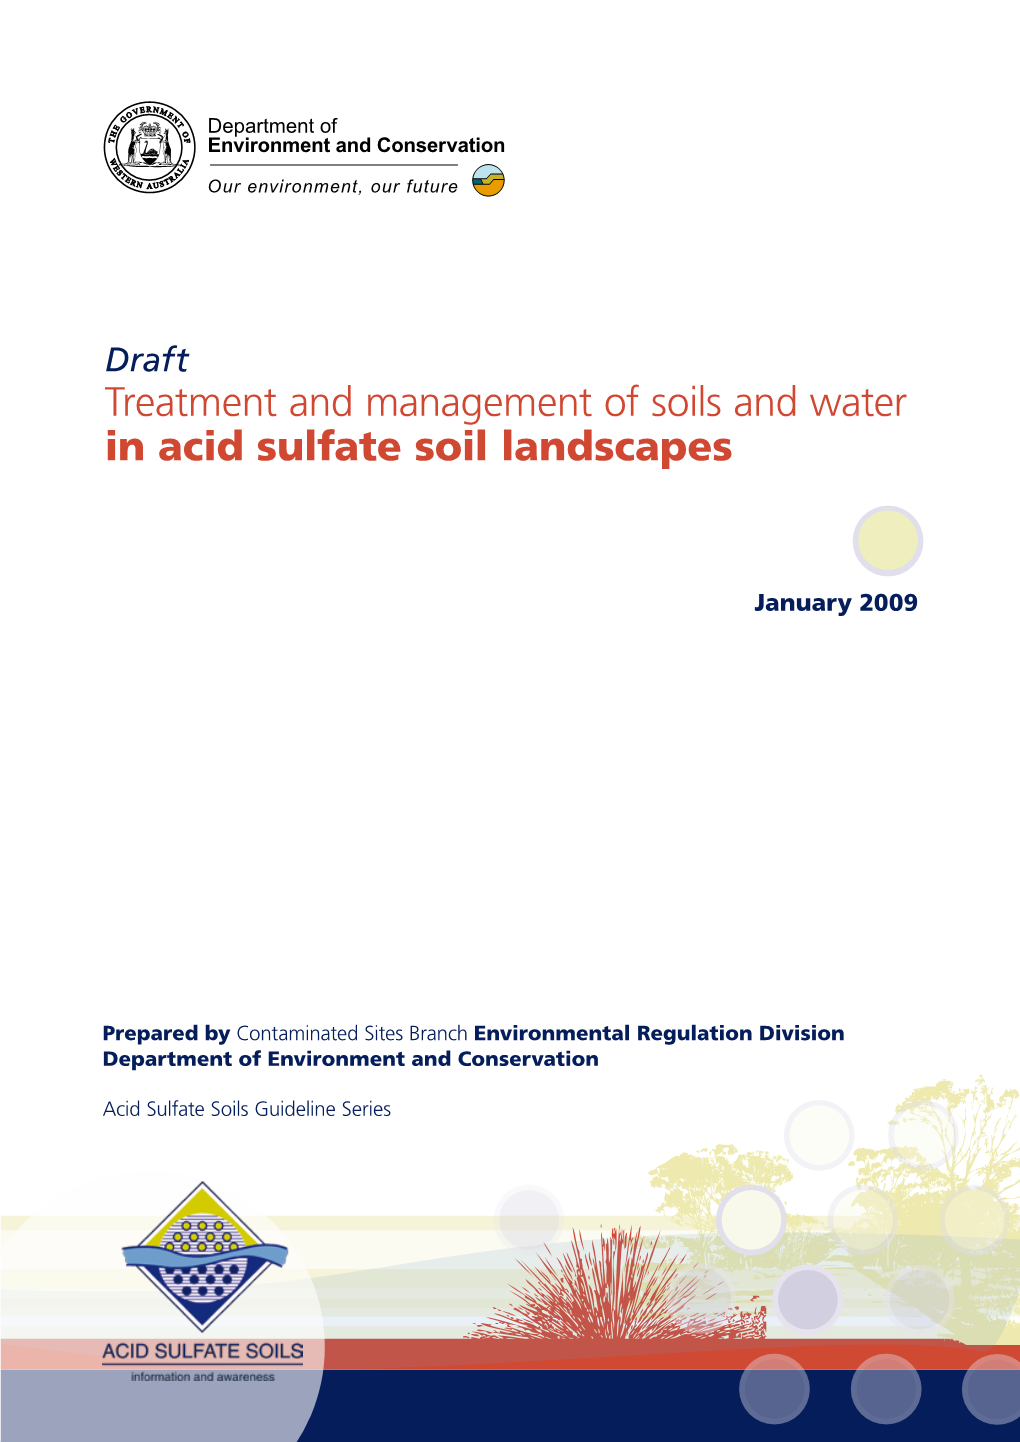 Treatment and Management of Soils and Water in Acid Sulfate Soil Landscapes